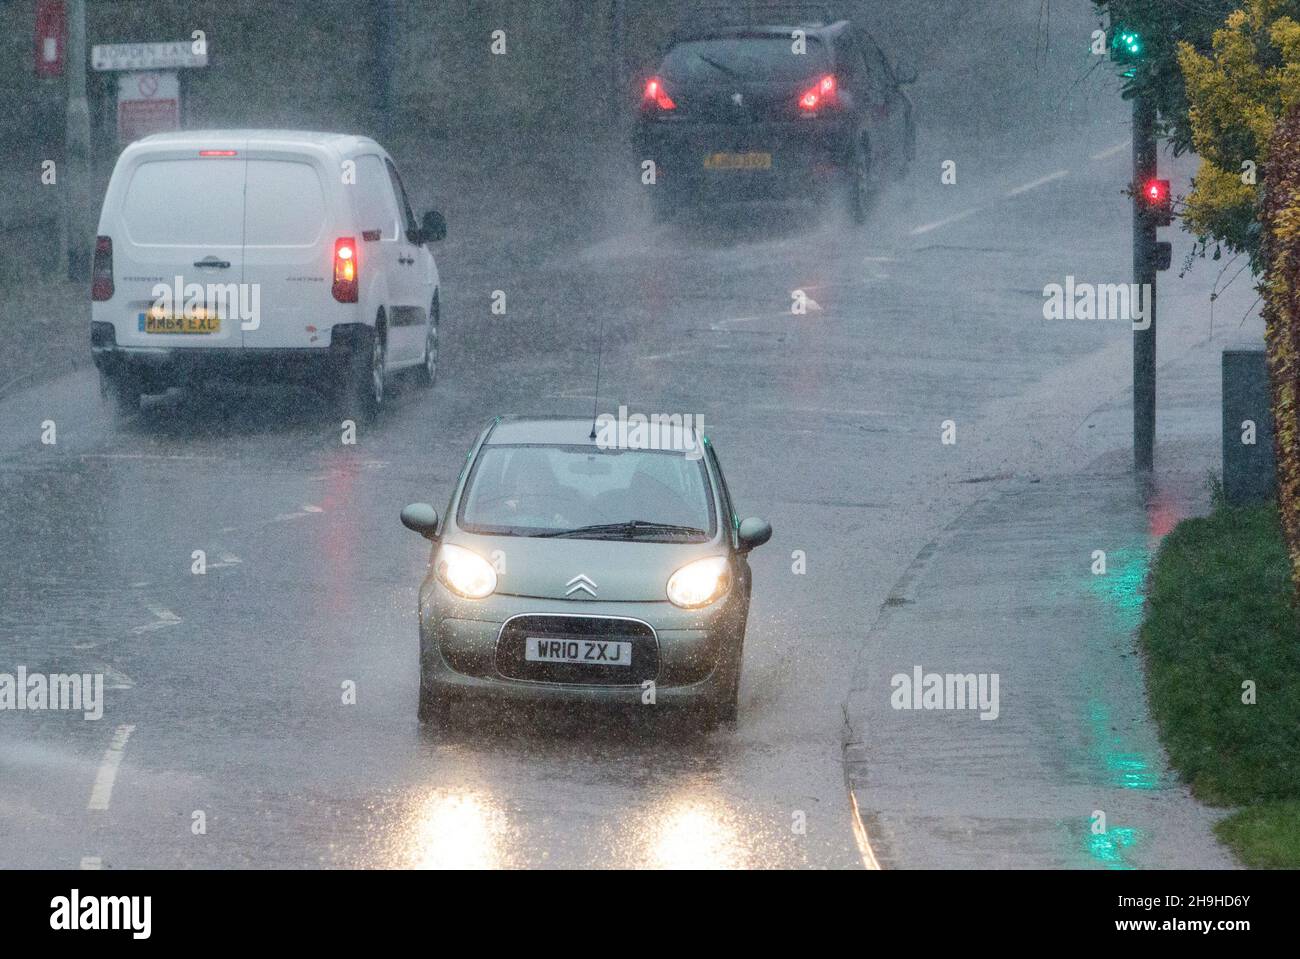 Chippenham, Wiltshire, UK. 7th December, 2021. Drivers are pictured braving torrential rain in Chippenham as storm Barra approaches southern England. Credit: Lynchpics/Alamy Live News Stock Photo